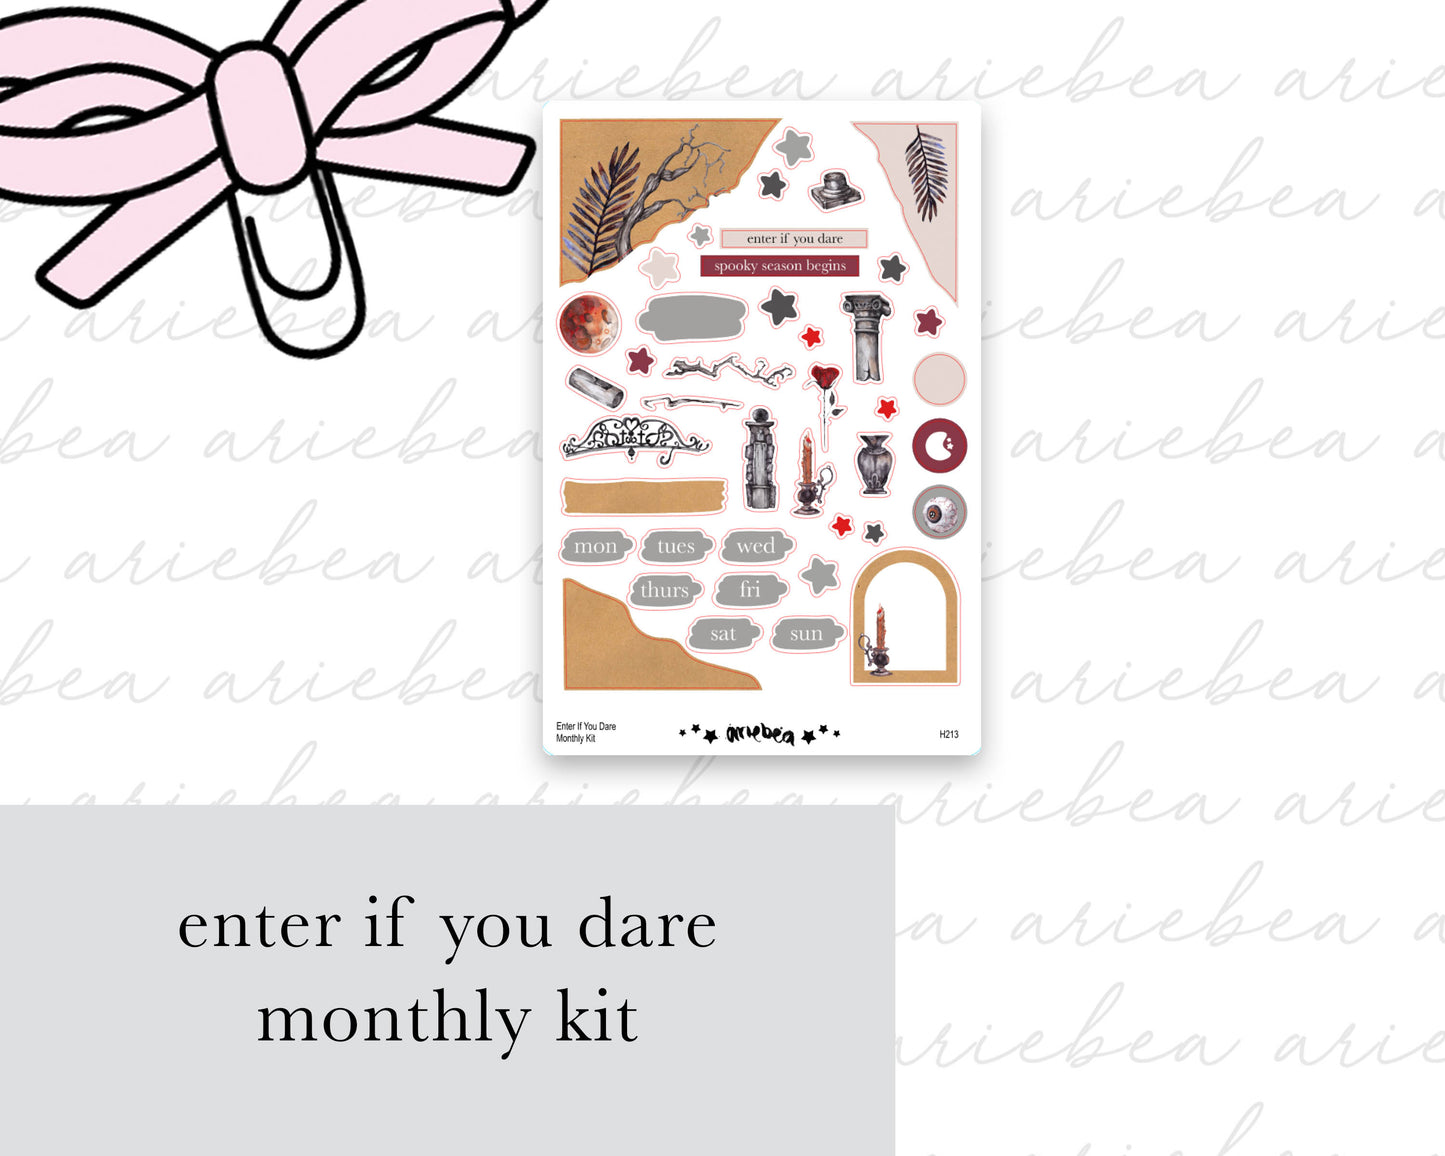 Enter If You Dare Full Mini Kit (4 pages)